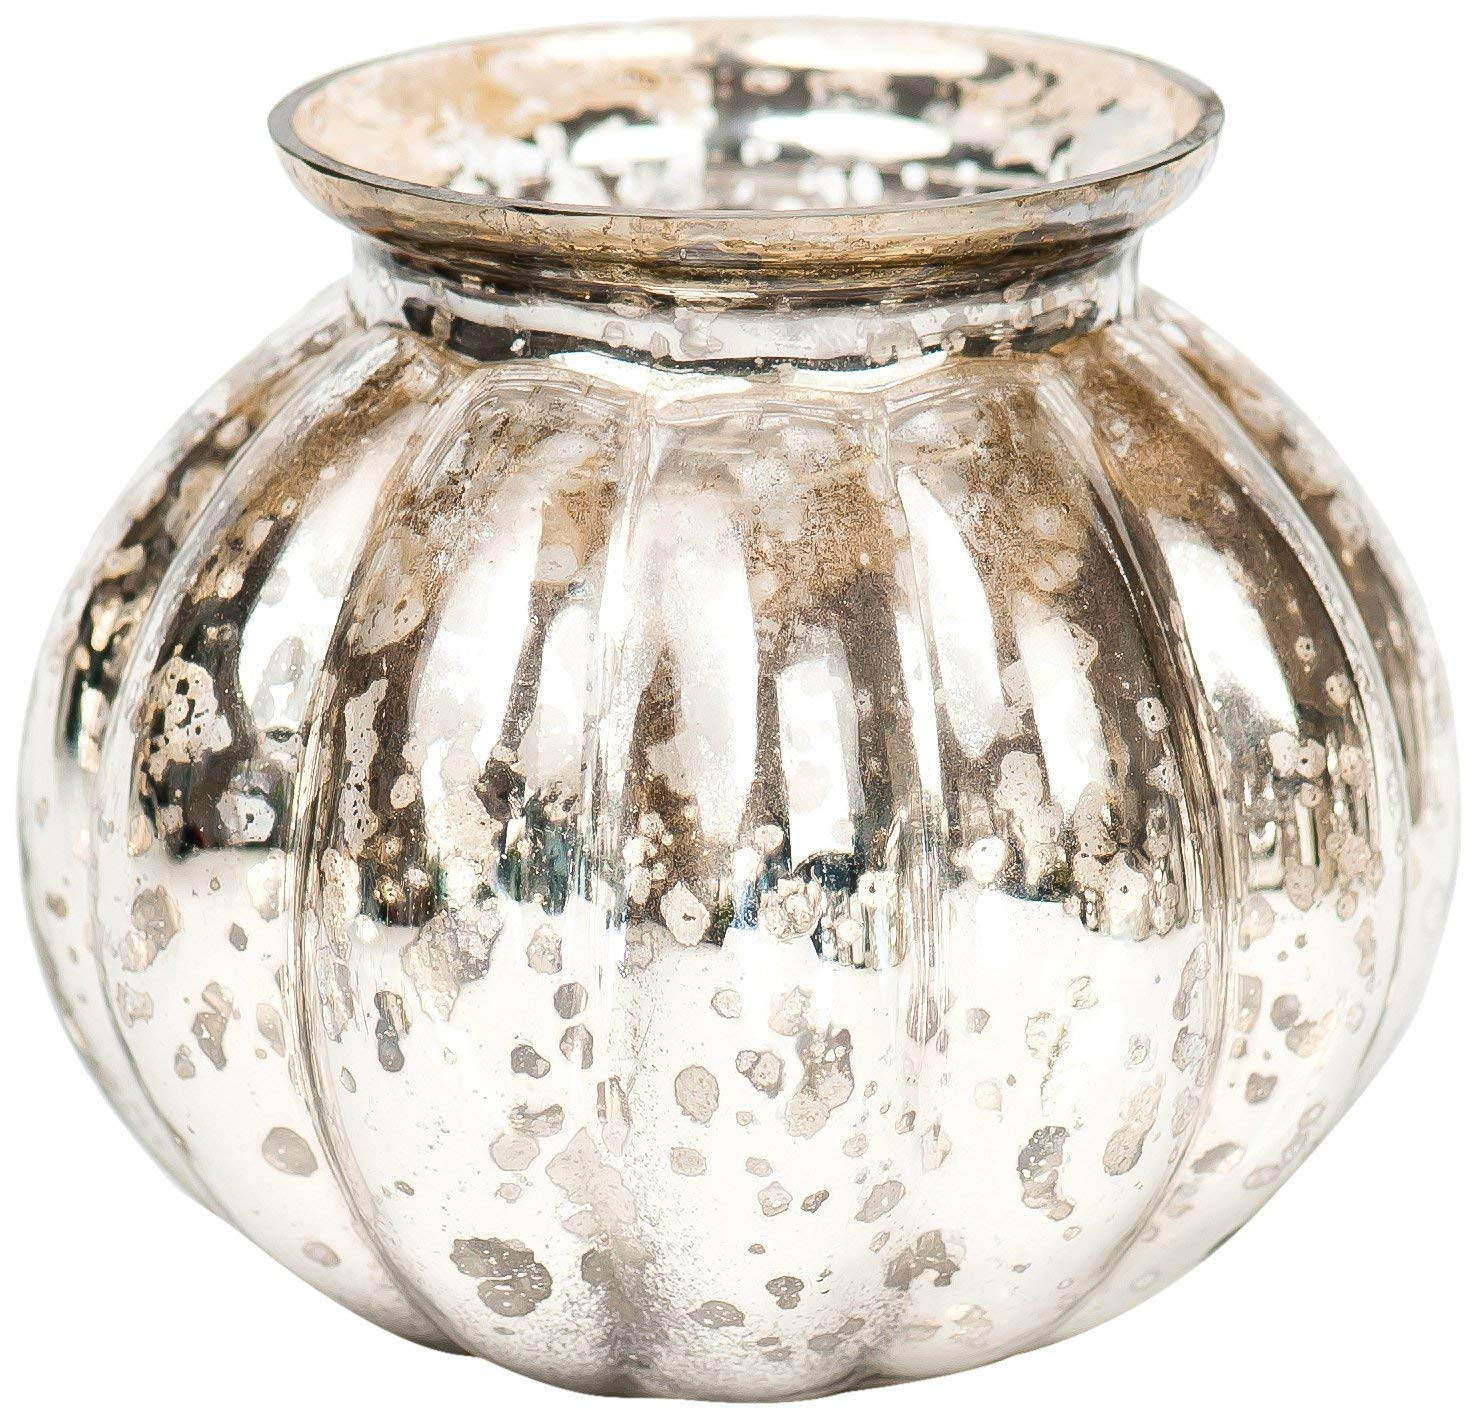 18 Lovely Mercury Glass Floral Vases 2024 free download mercury glass floral vases of insideretail mercury glass mini round vase silver 13 cm set of 3 in insideretail mercury glass mini round vase silver 13 cm set of 3 amazon co uk kitchen home